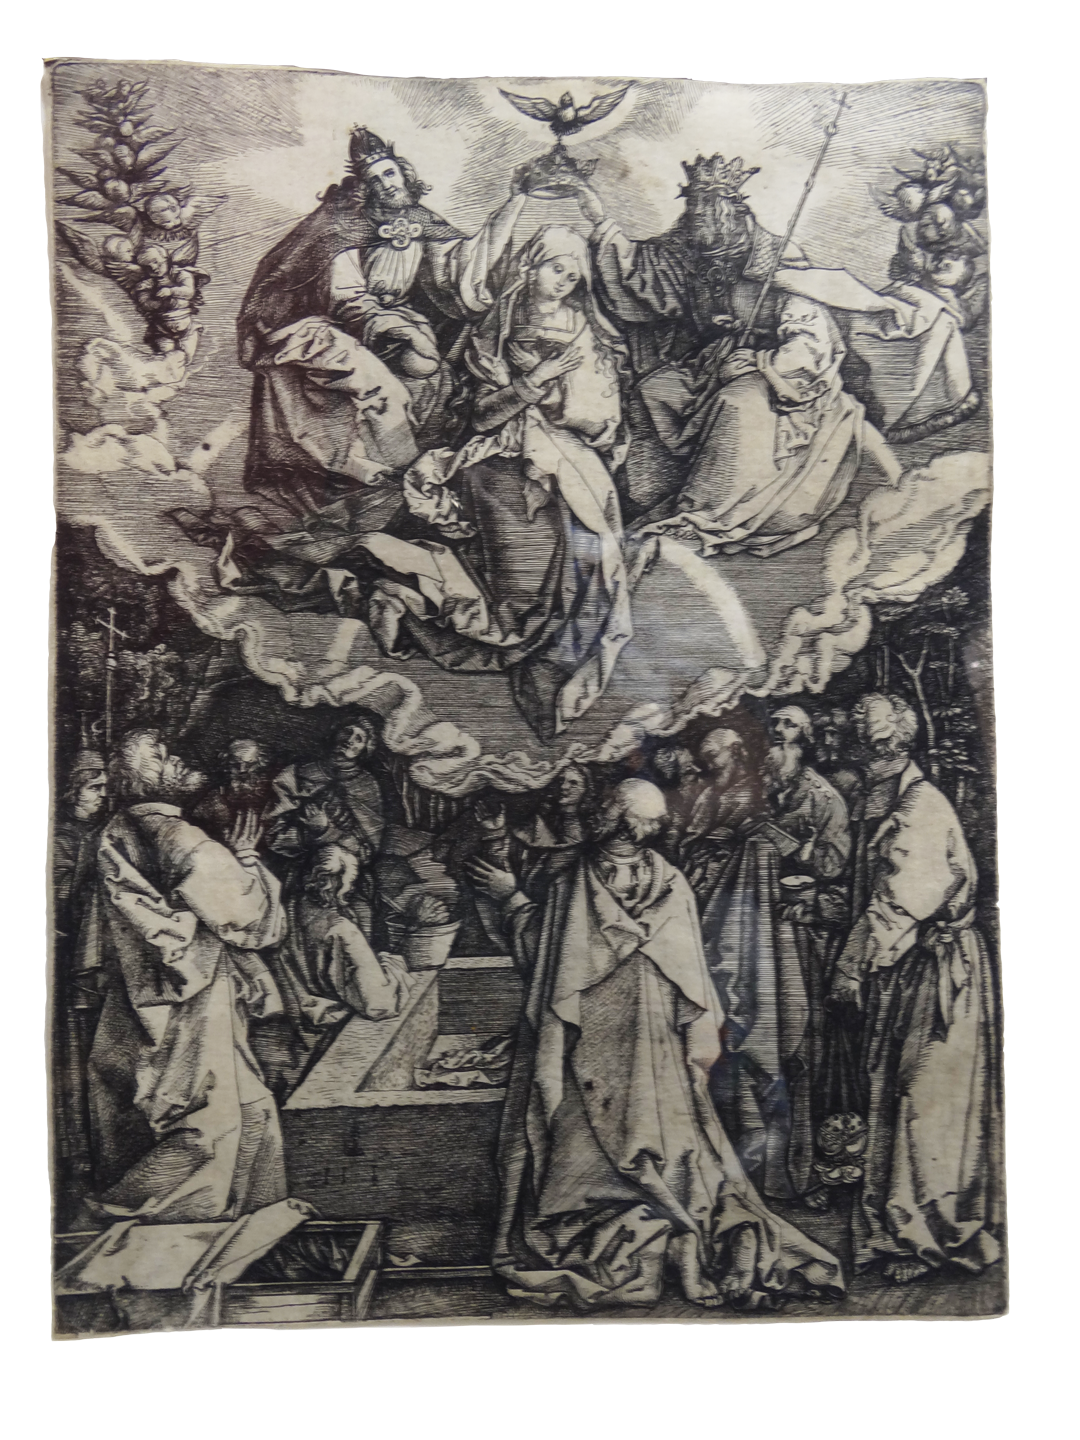 Black and white print. The Blessed Virgin Mary, sitting, is centered on the top half of the image as if rising. Her head is bowed, and her arms are crossed at her chest. A dove representing the Holy Spirit is above her head with a depiction of God the Father on the right and Jesus on the left, each holding the crown above Mary’s head. A grouping of angels is on each side. Below are several onlookers assembled around a burial vault, looking upward.